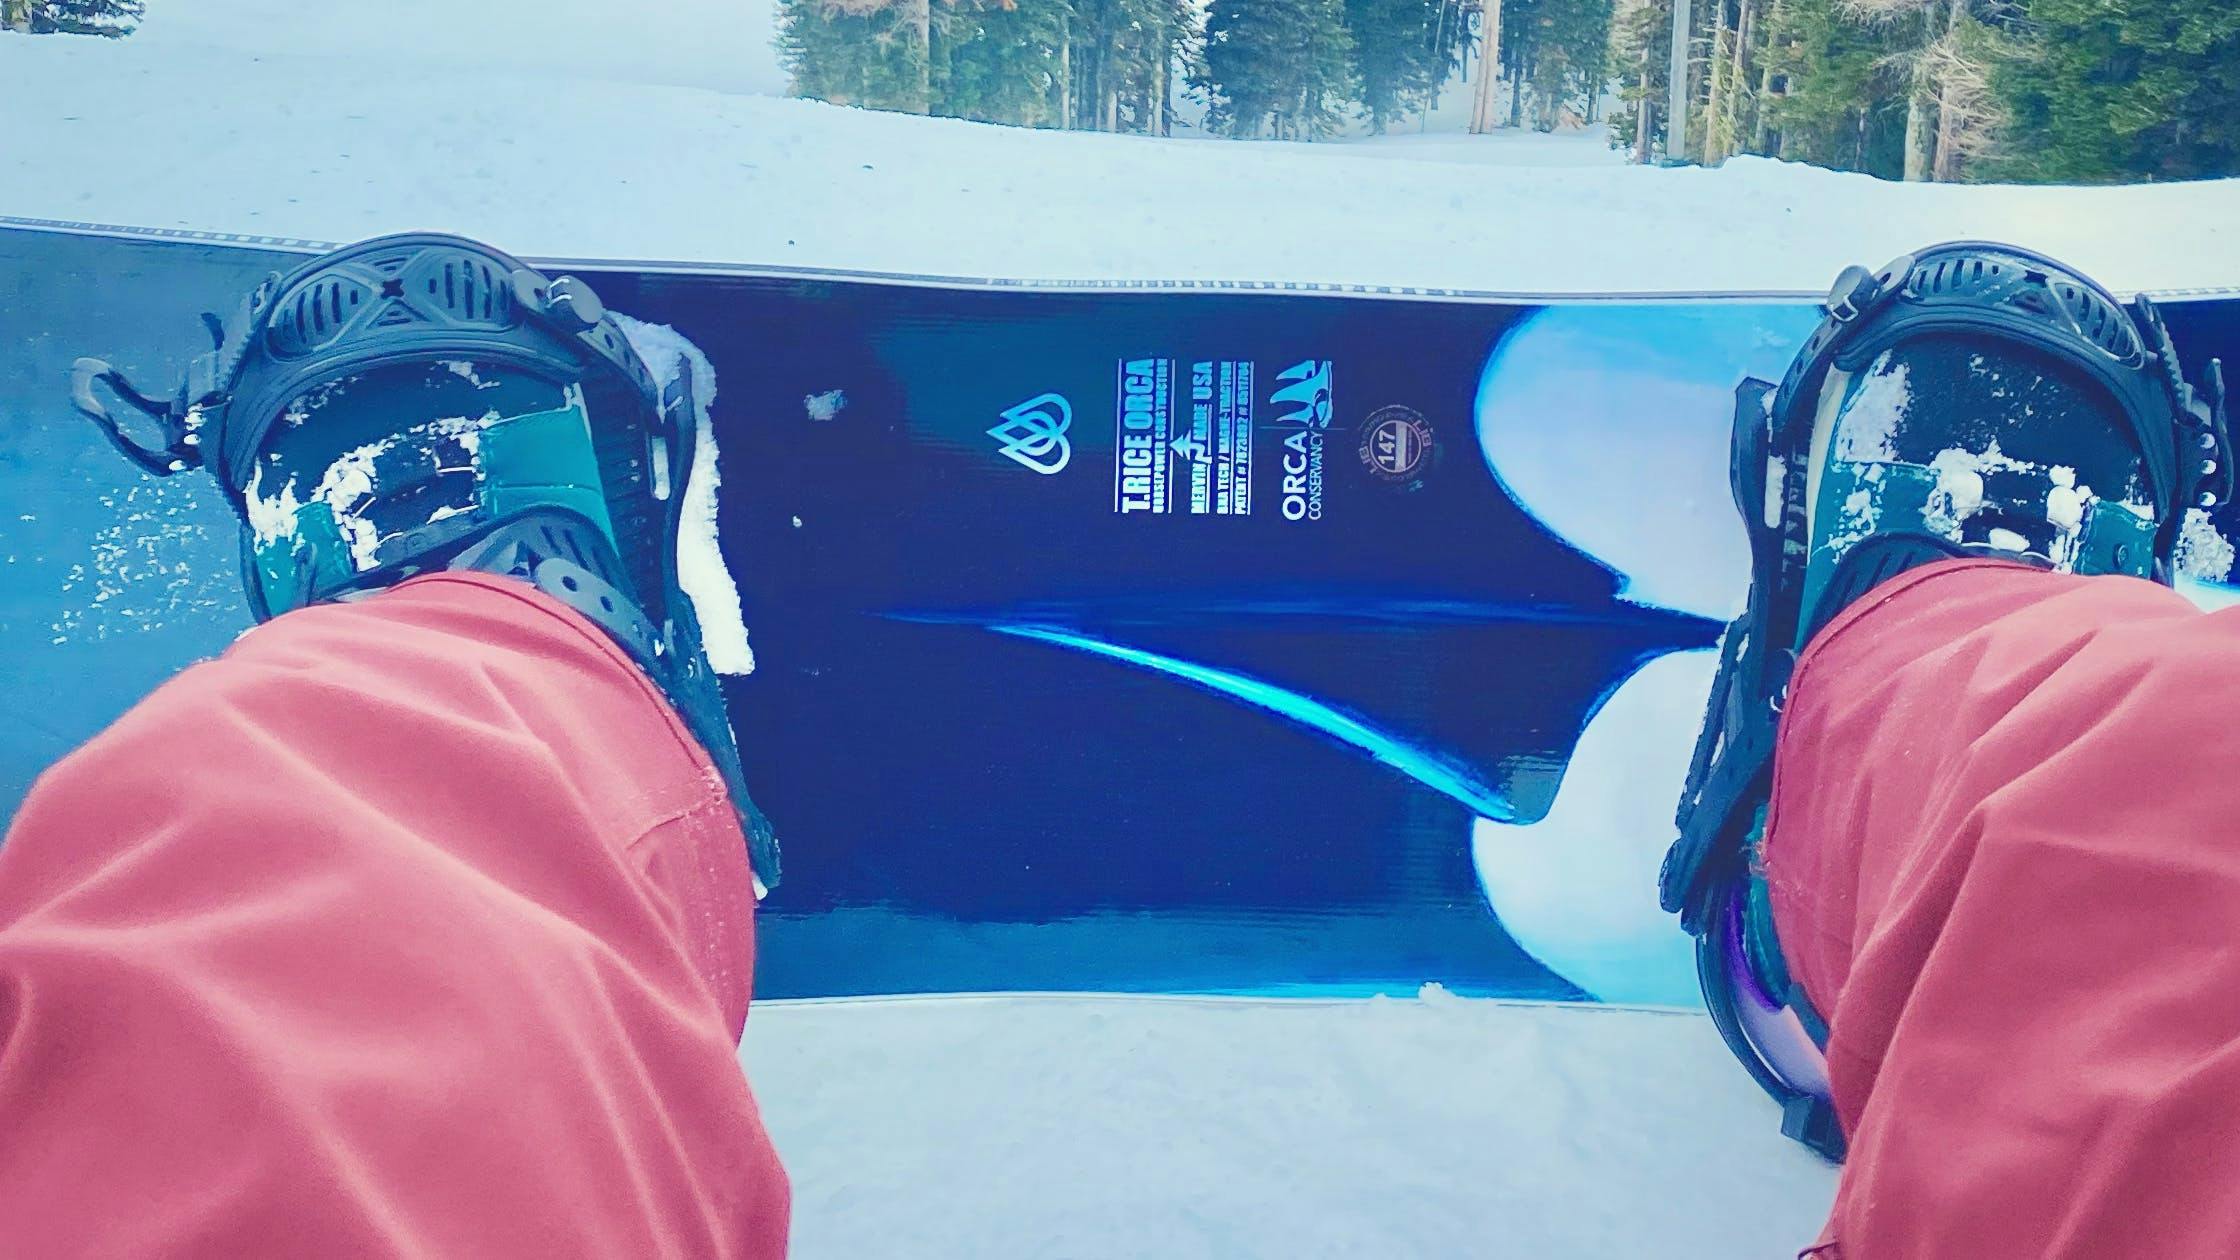 Top down view of the Lib tech Orca Snowboard on a mountain.